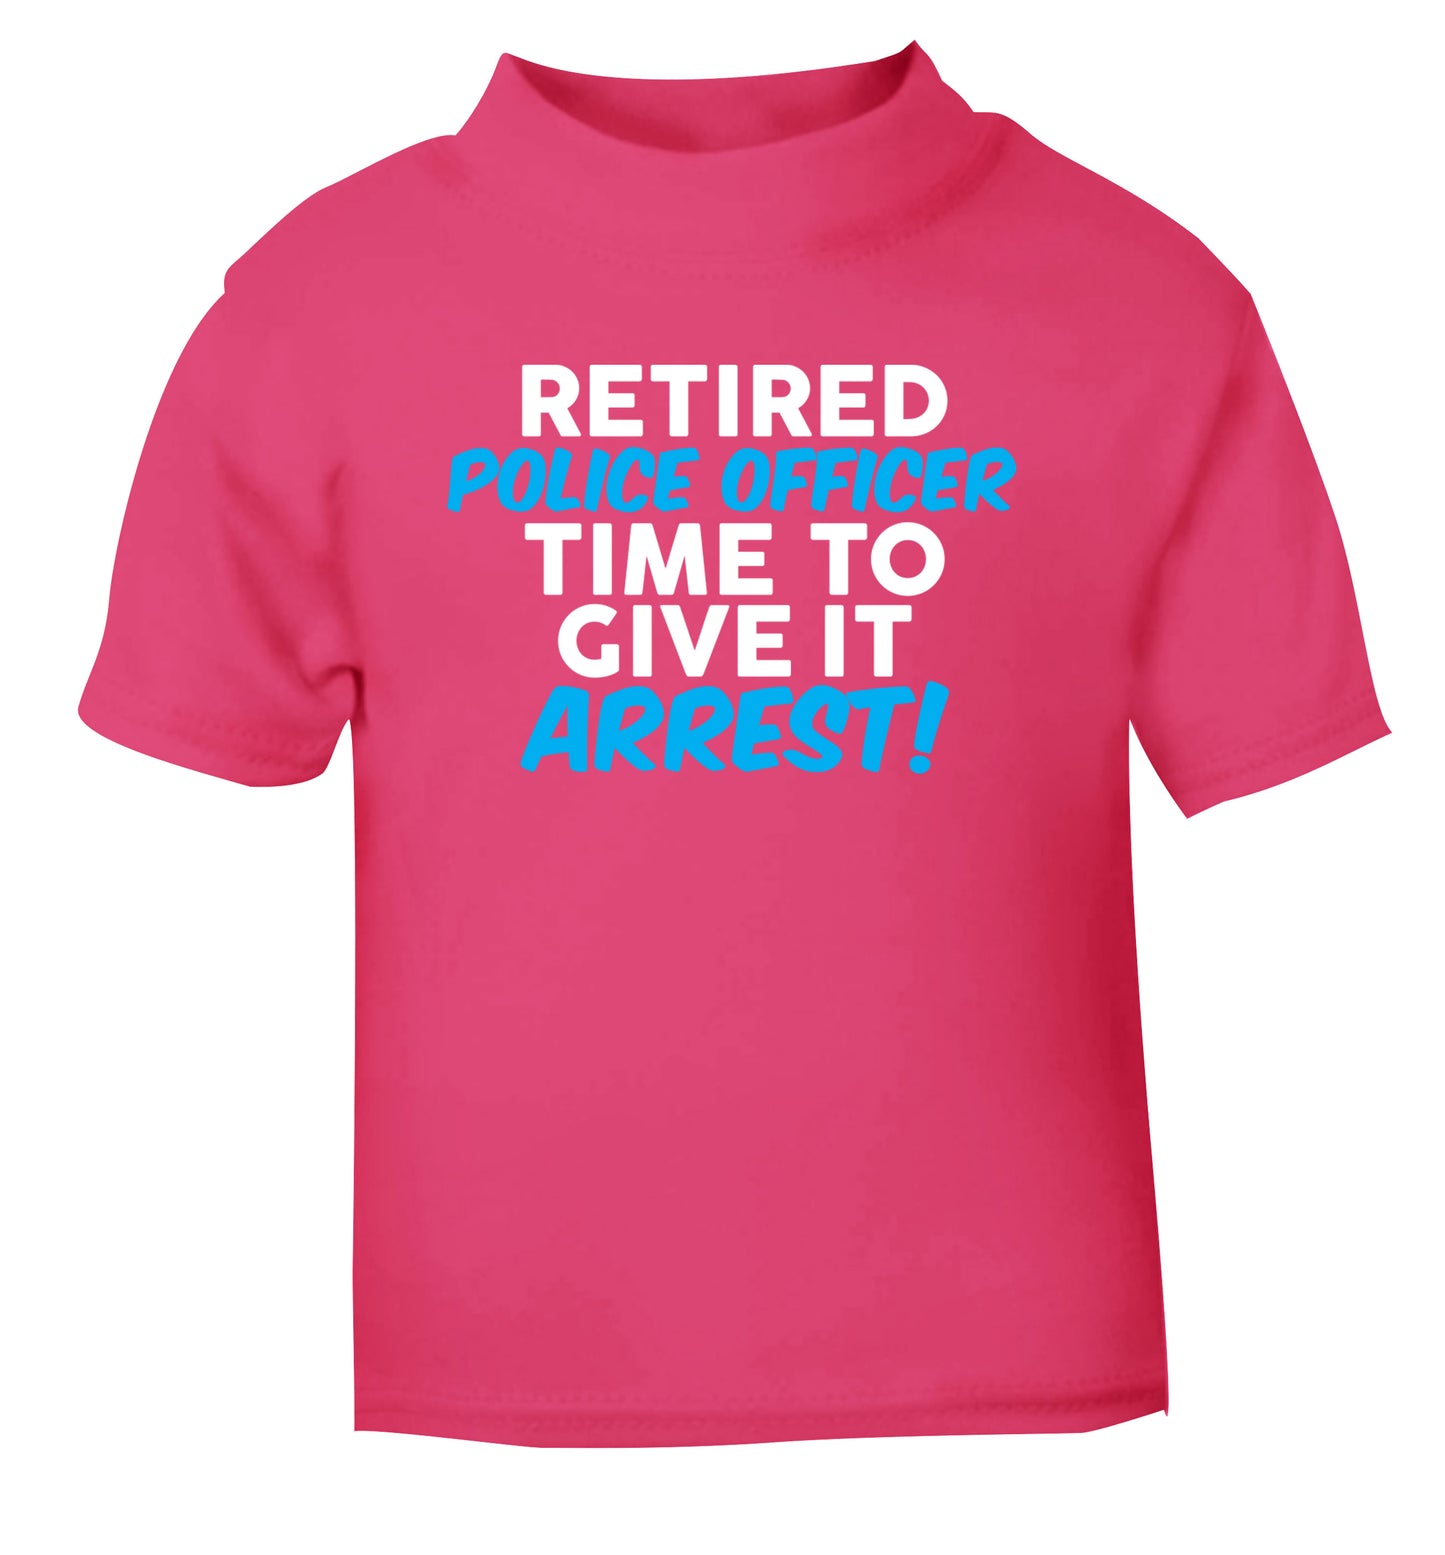 Retired police officer time to give it arrest pink Baby Toddler Tshirt 2 Years